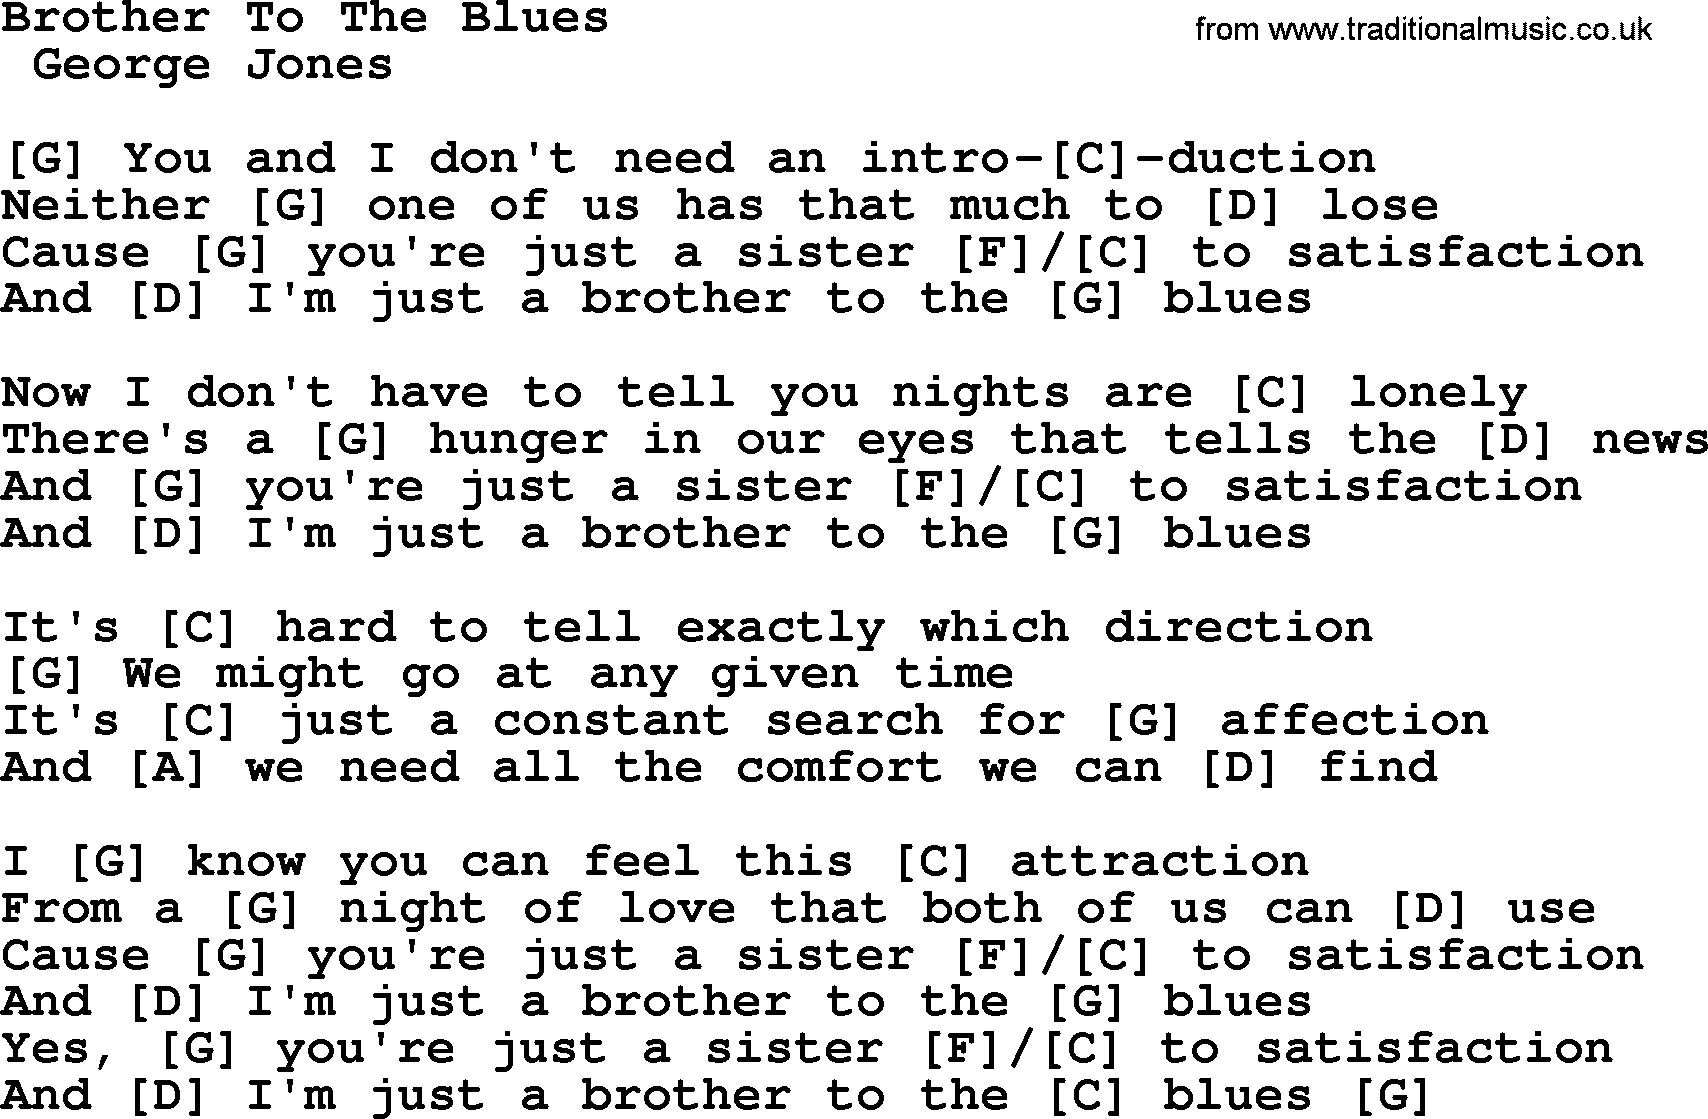 George Jones song: Brother To The Blues, lyrics and chords